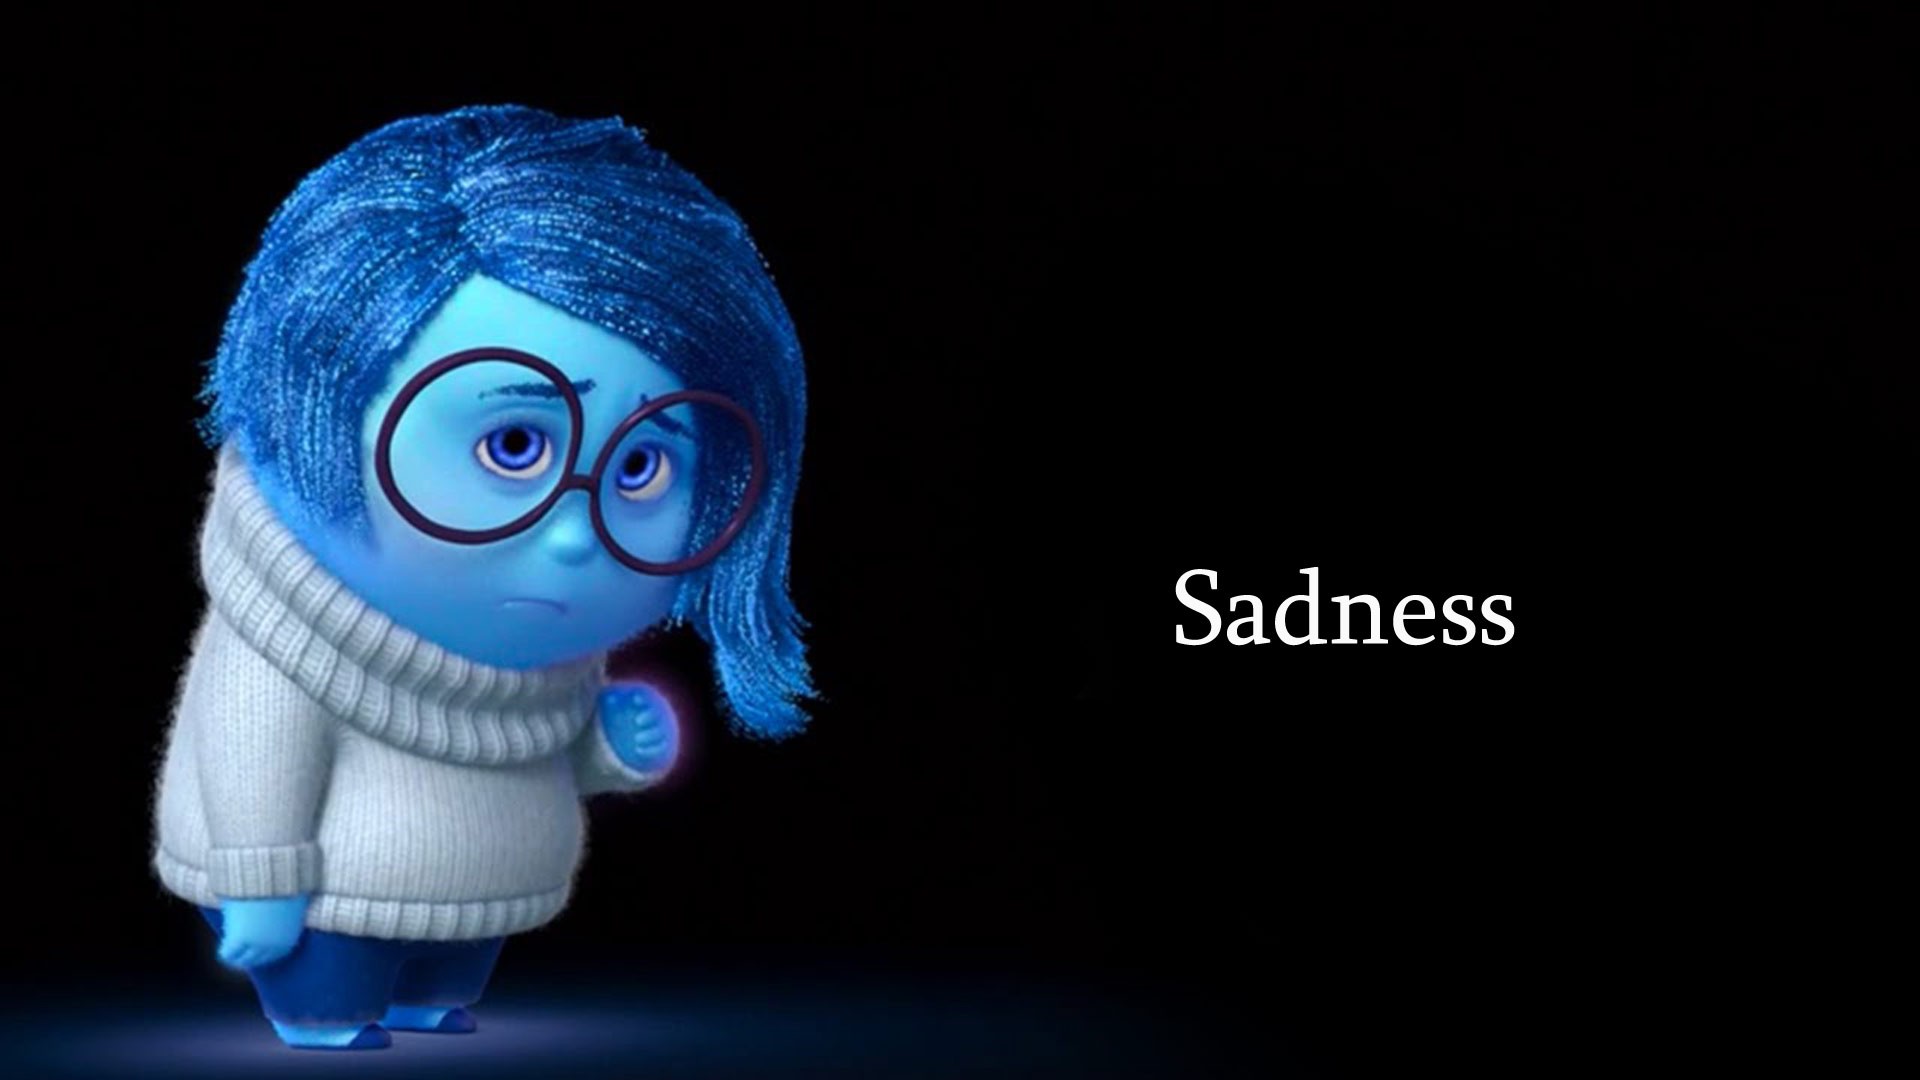 Download Sadness Inside Out 2015 Film HD Wallpaper Search more